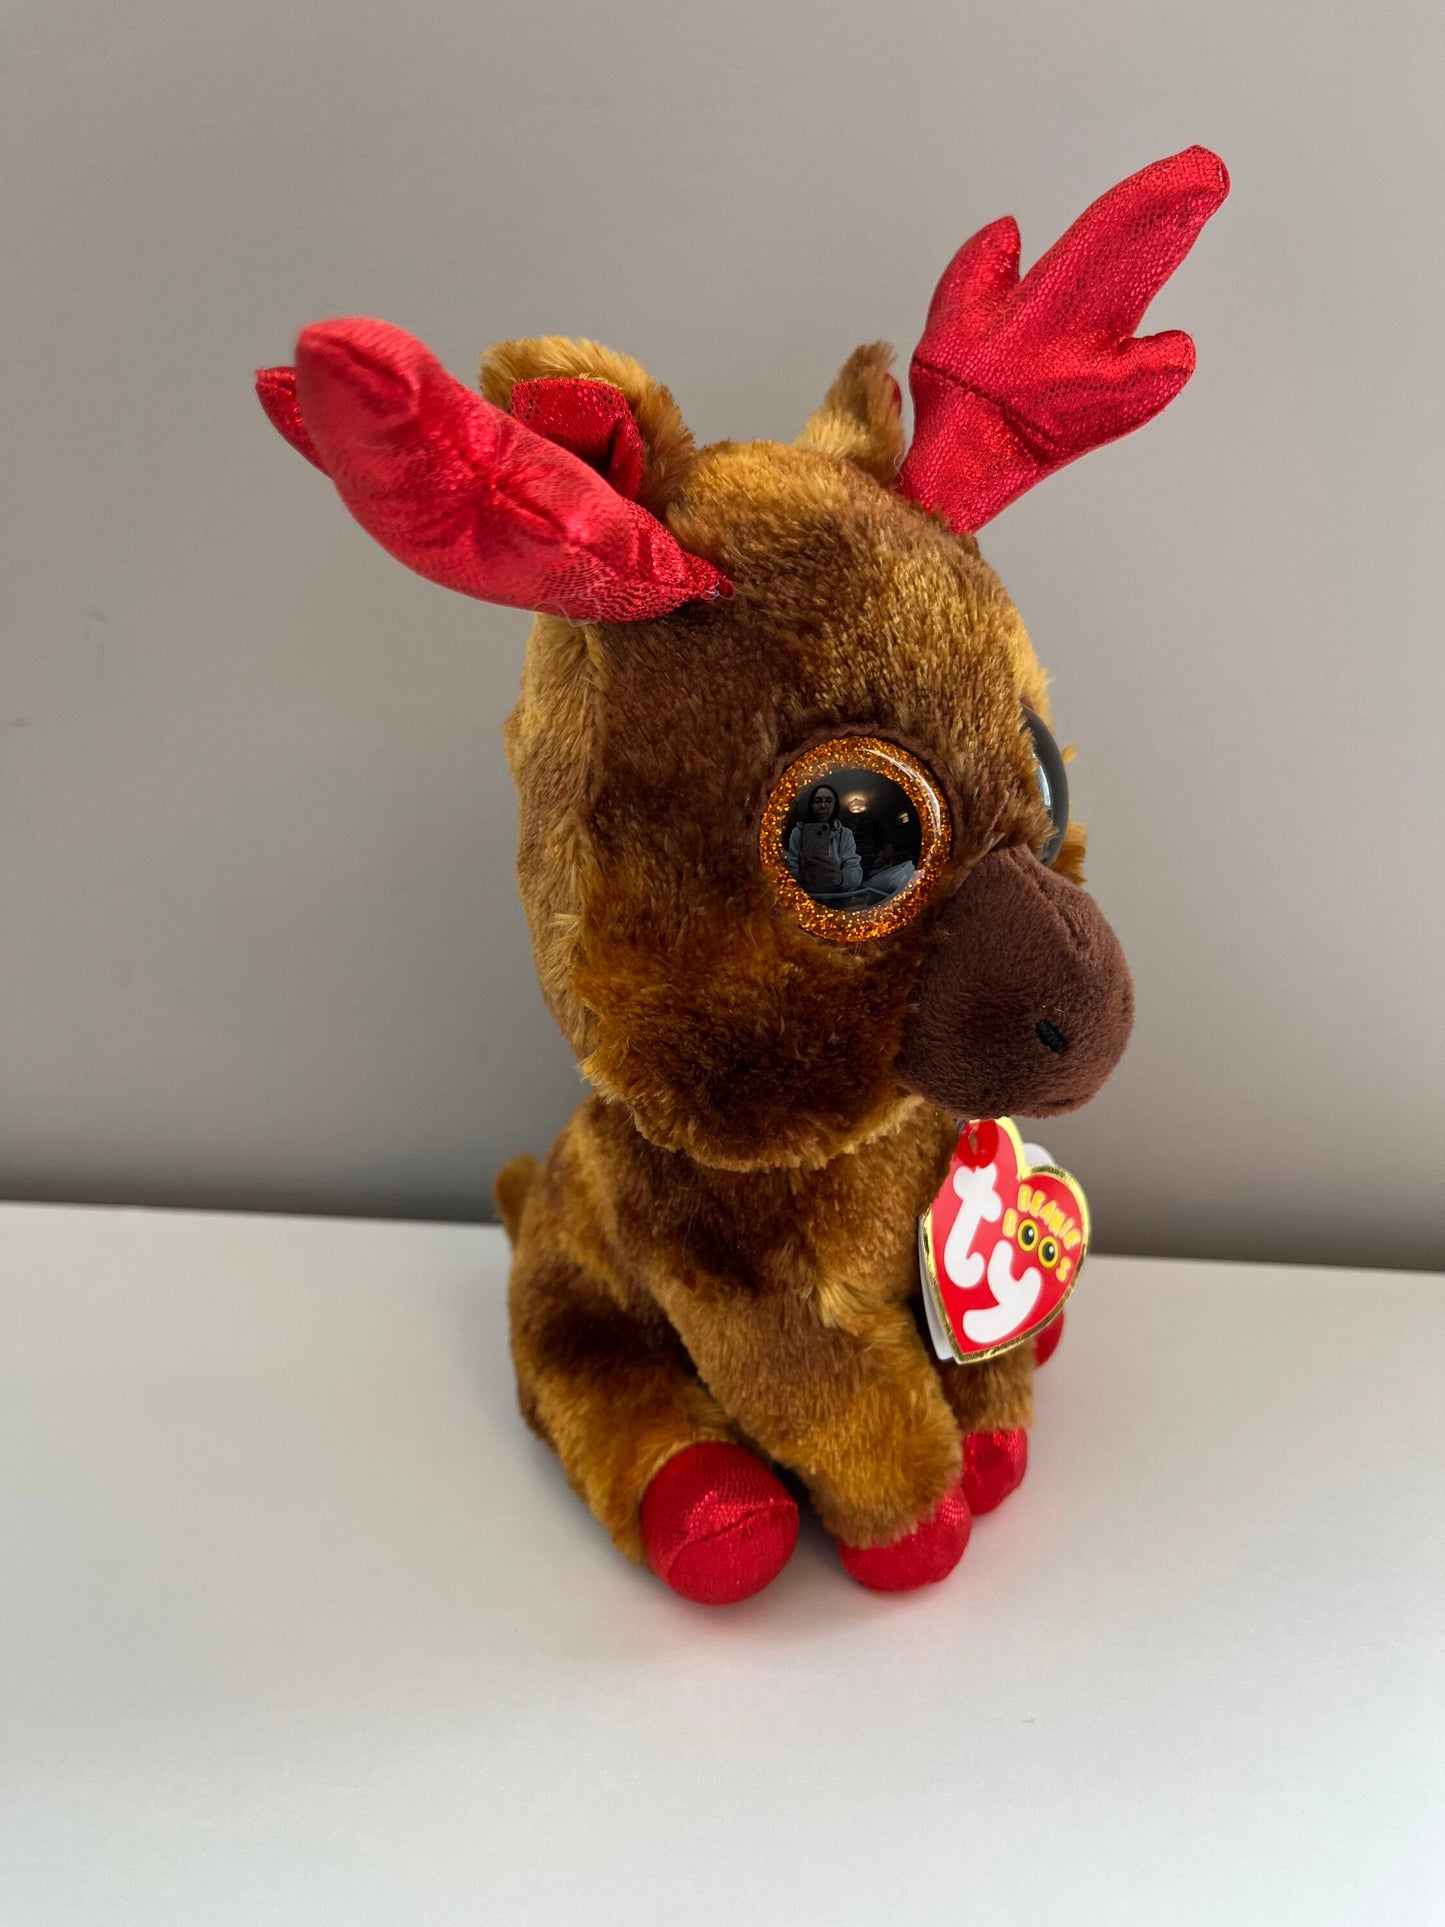 Ty Beanie Boo “Maple” the Canadian Moose (6 inch)